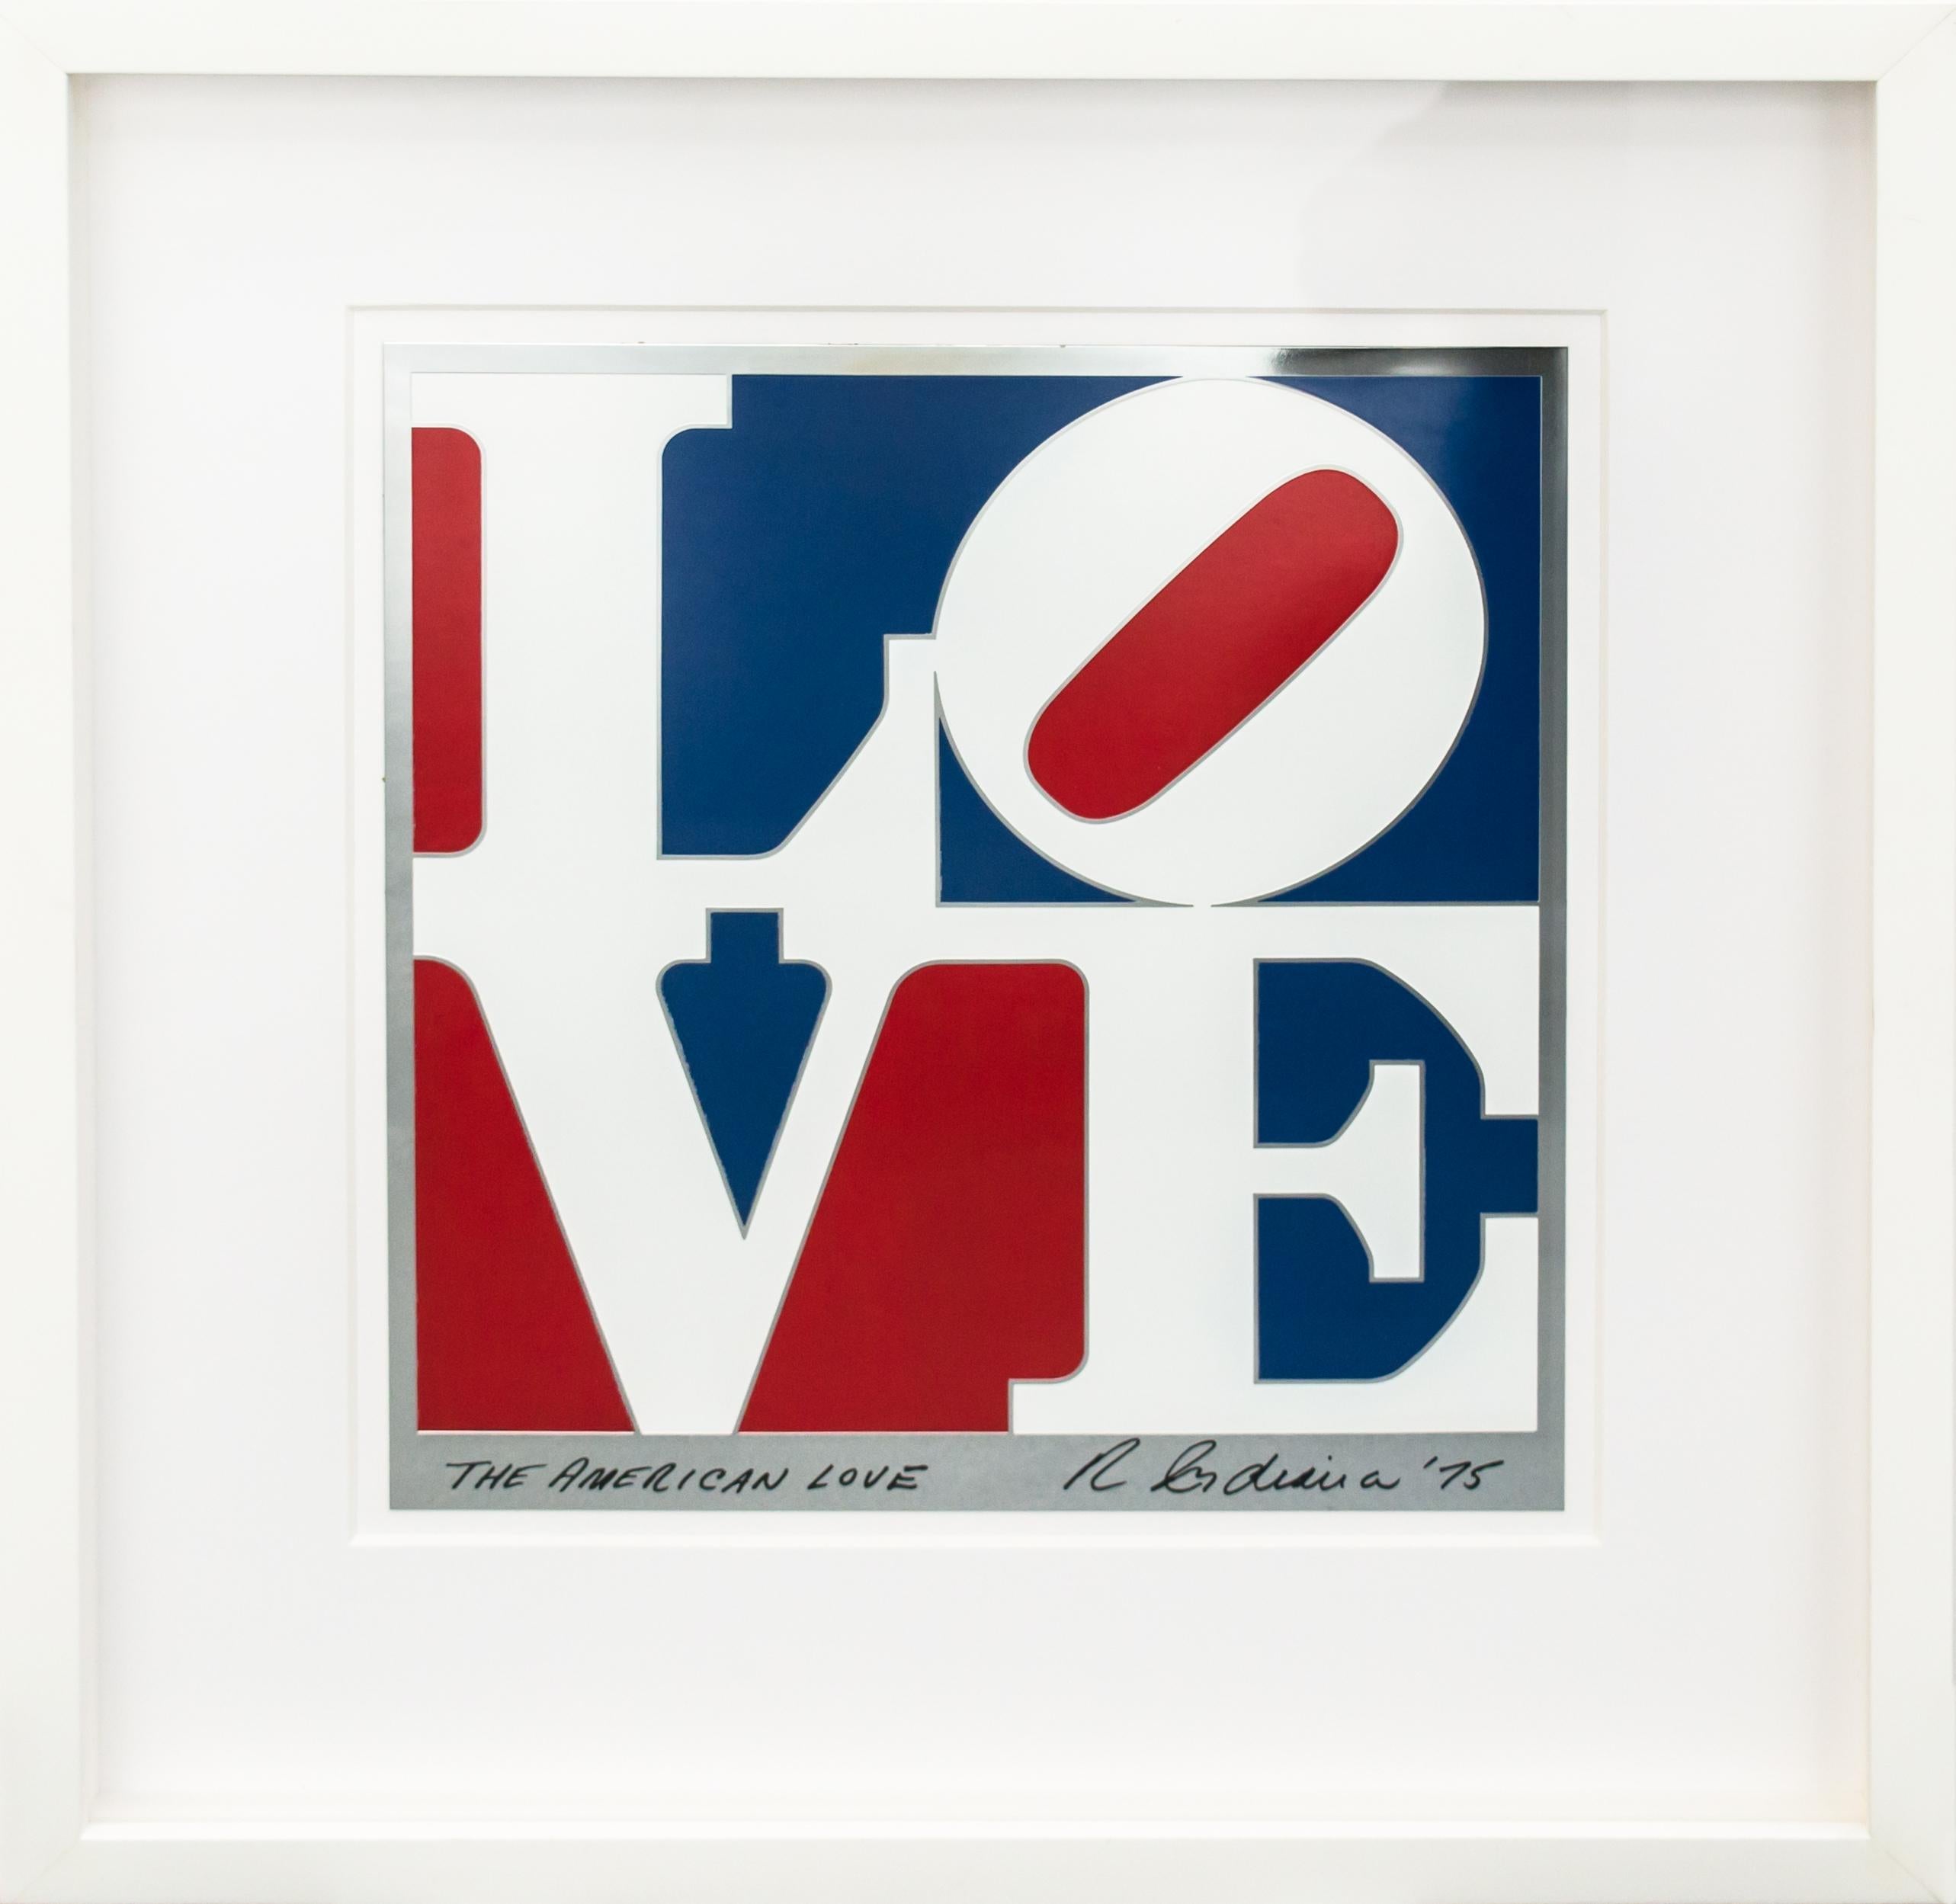 The American Love - Art by Robert Indiana